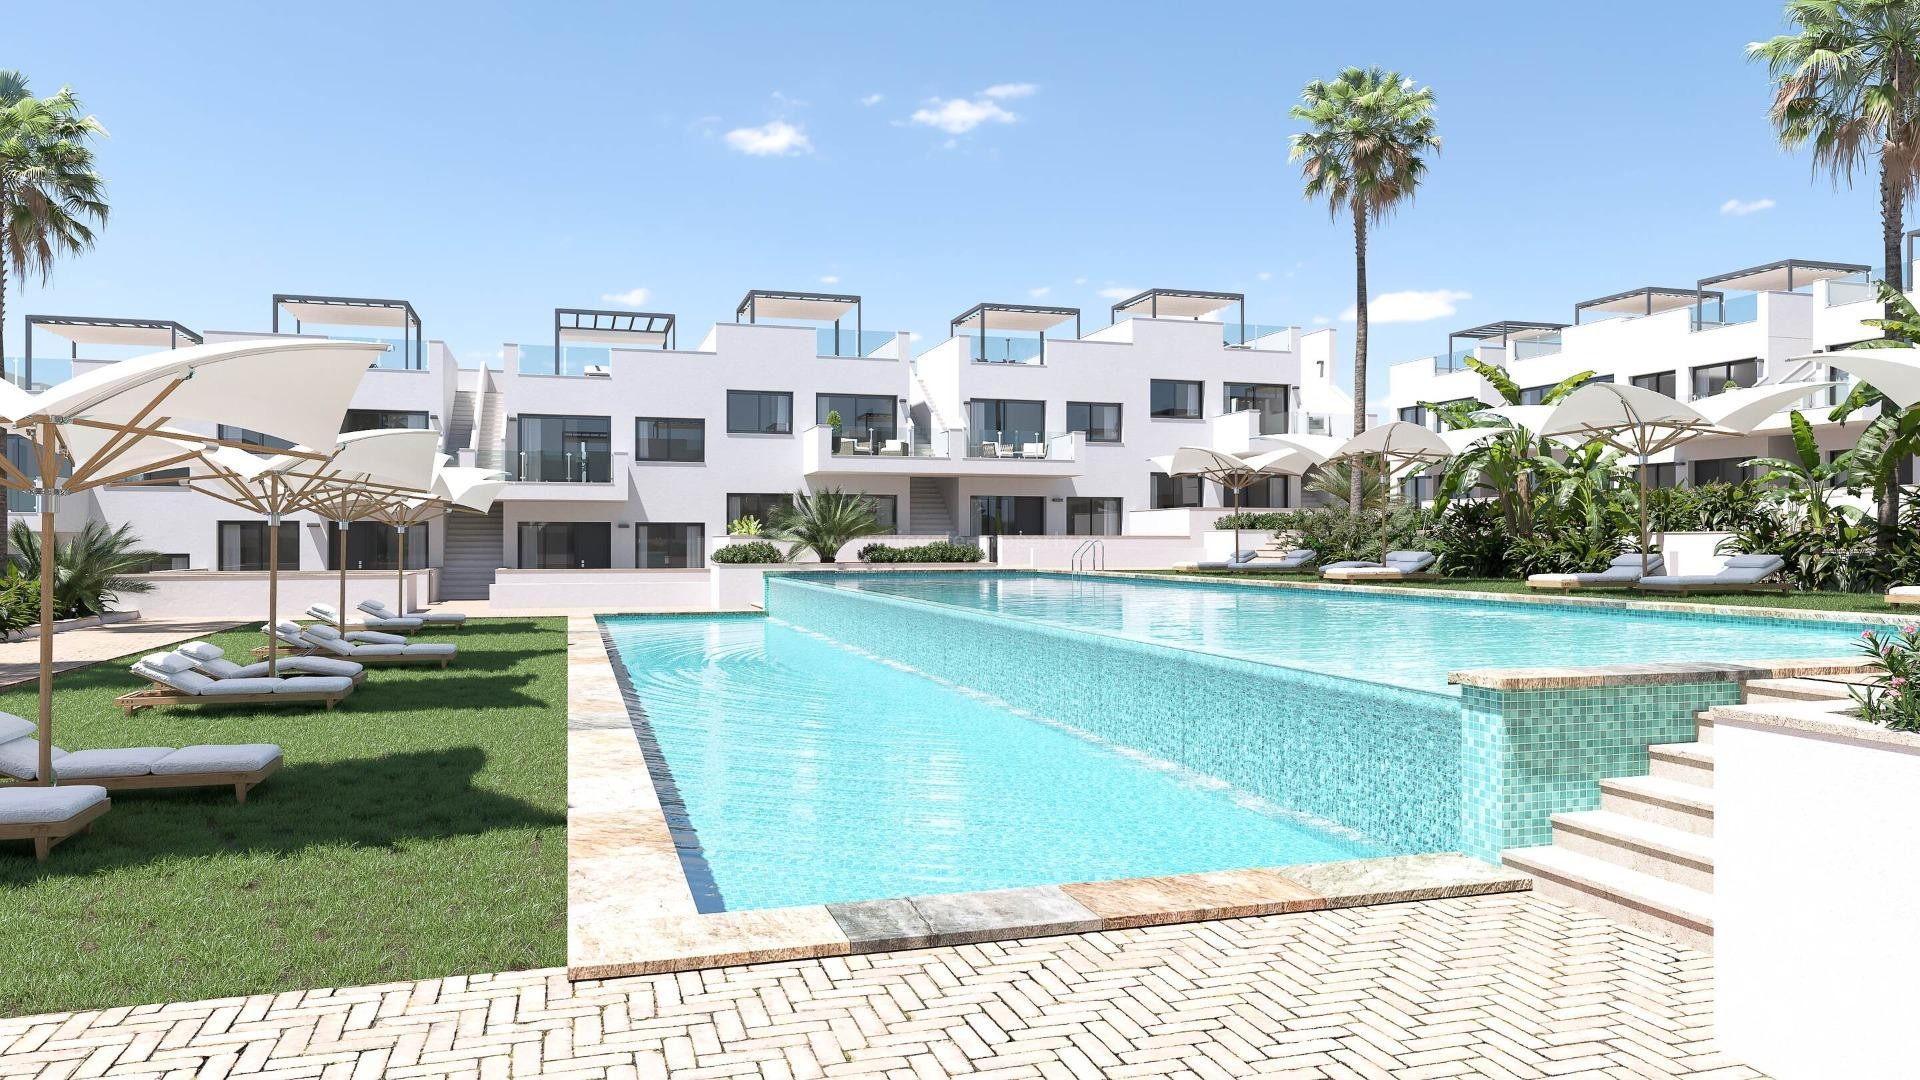 New bungalow apartments in Los Balcones, Torrevieja, 2/3 bedrooms, 2 bathrooms, garden or balcony and solarium, shared infinity pool with panoramic views